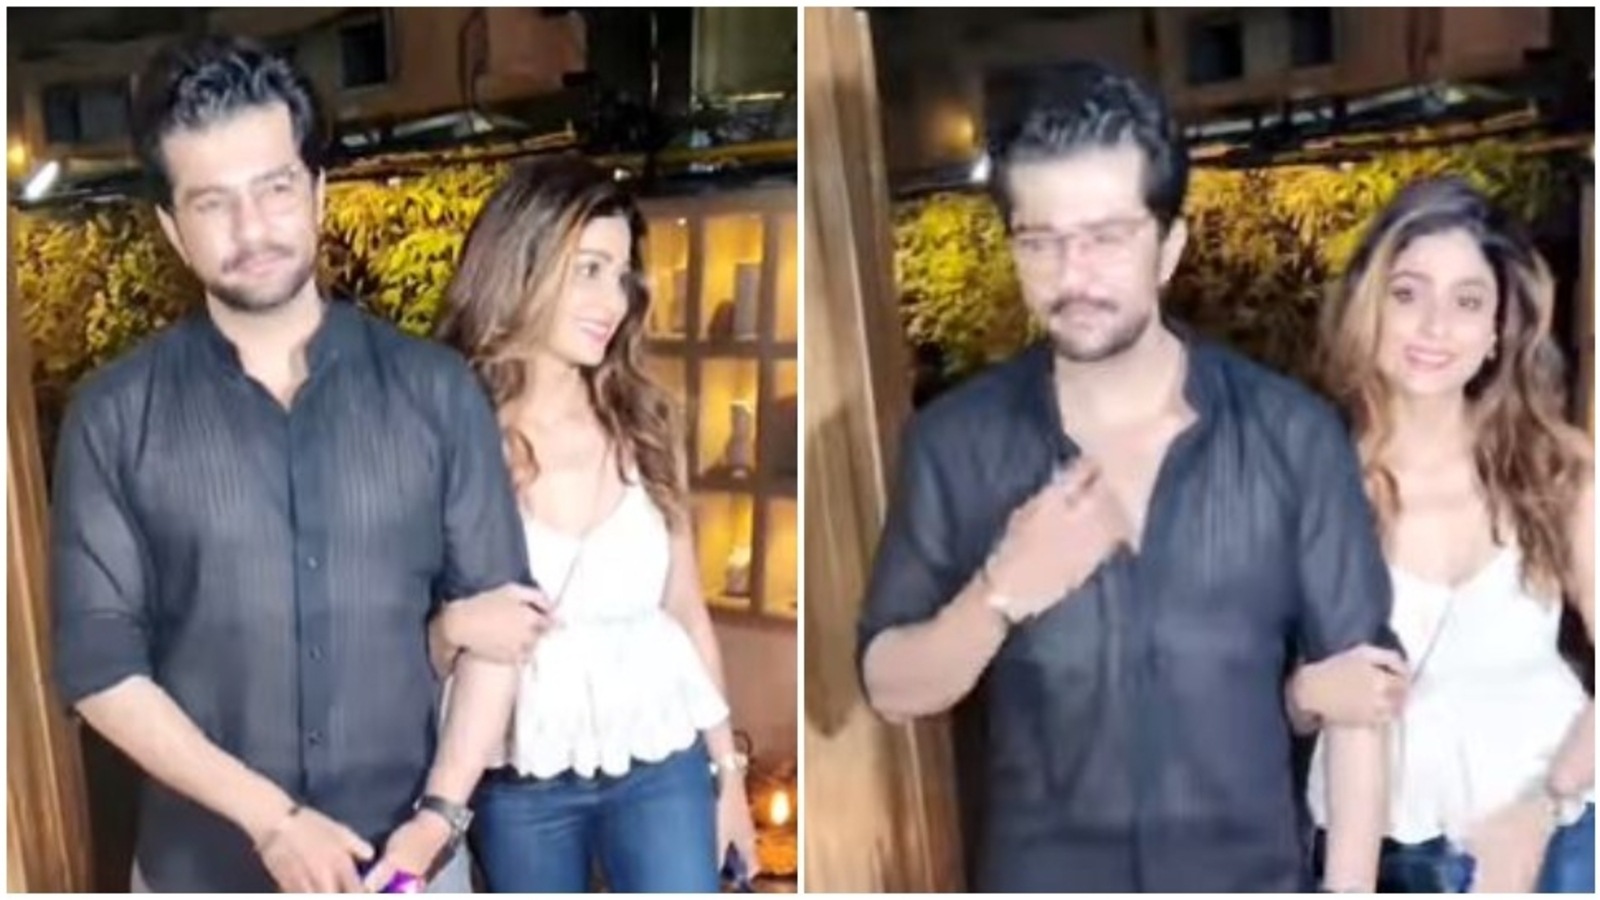 Shamita Shetty and Raqesh Bapat smile and hold hands as they step out for dinner. Watch